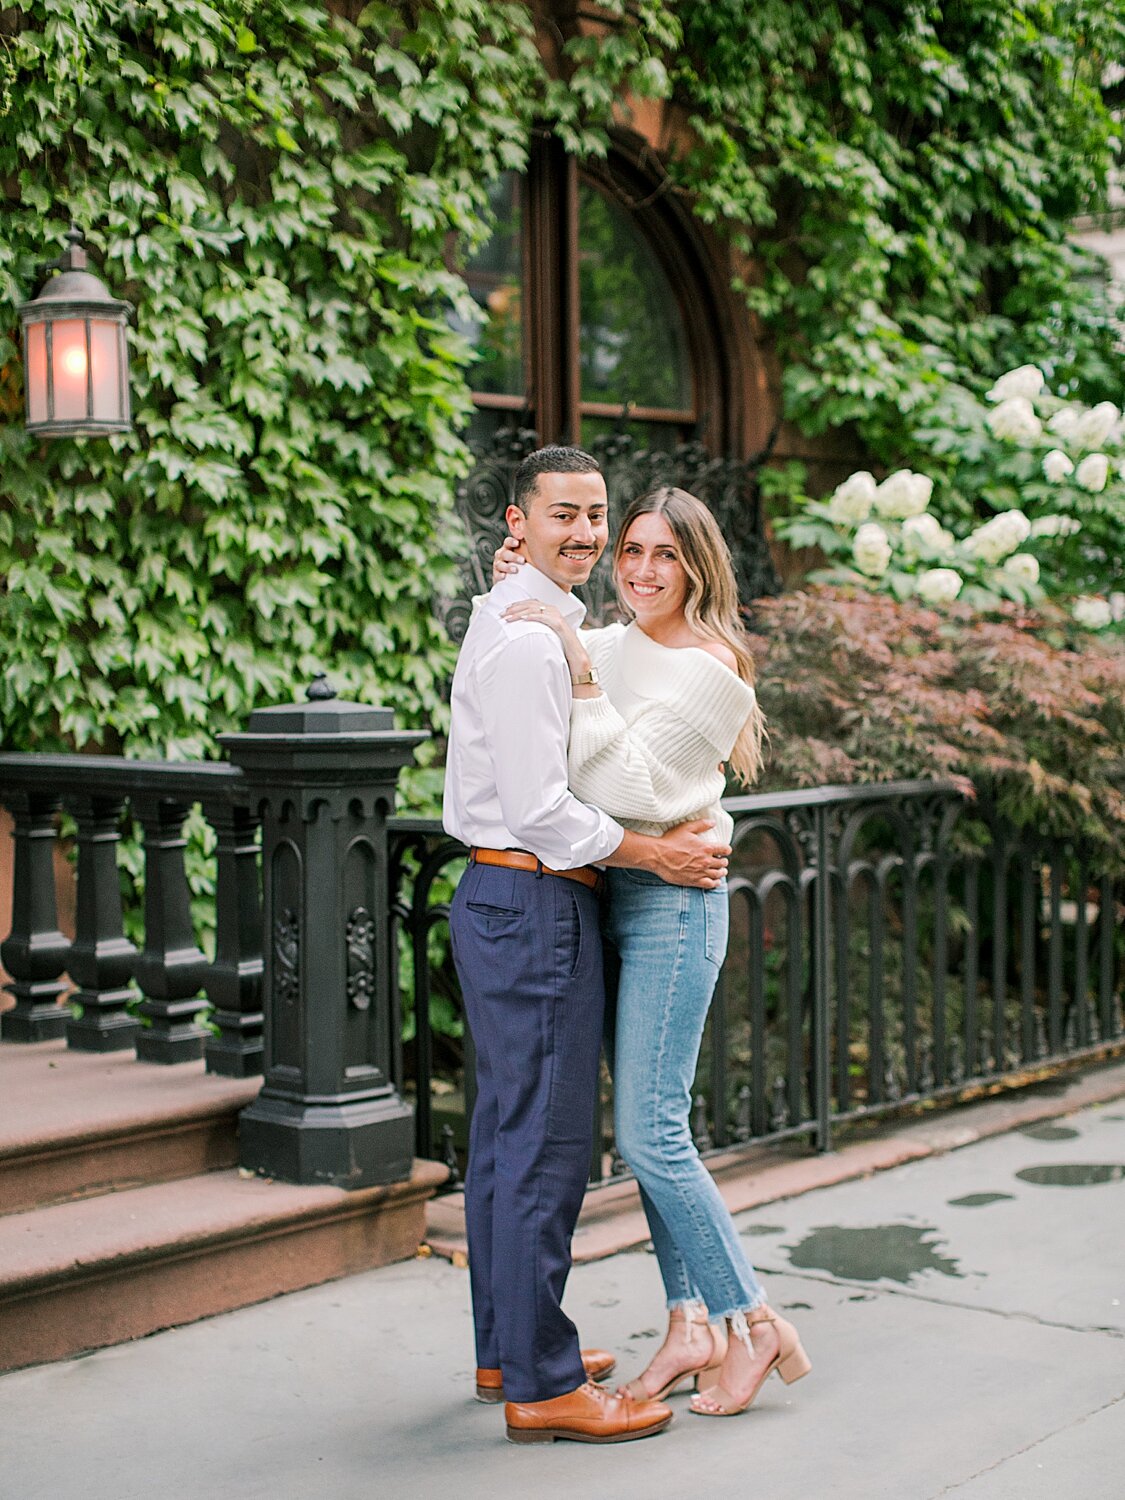 engaged couple poses by ivy wall  | Asher Gardner Photography | The Village engagement session